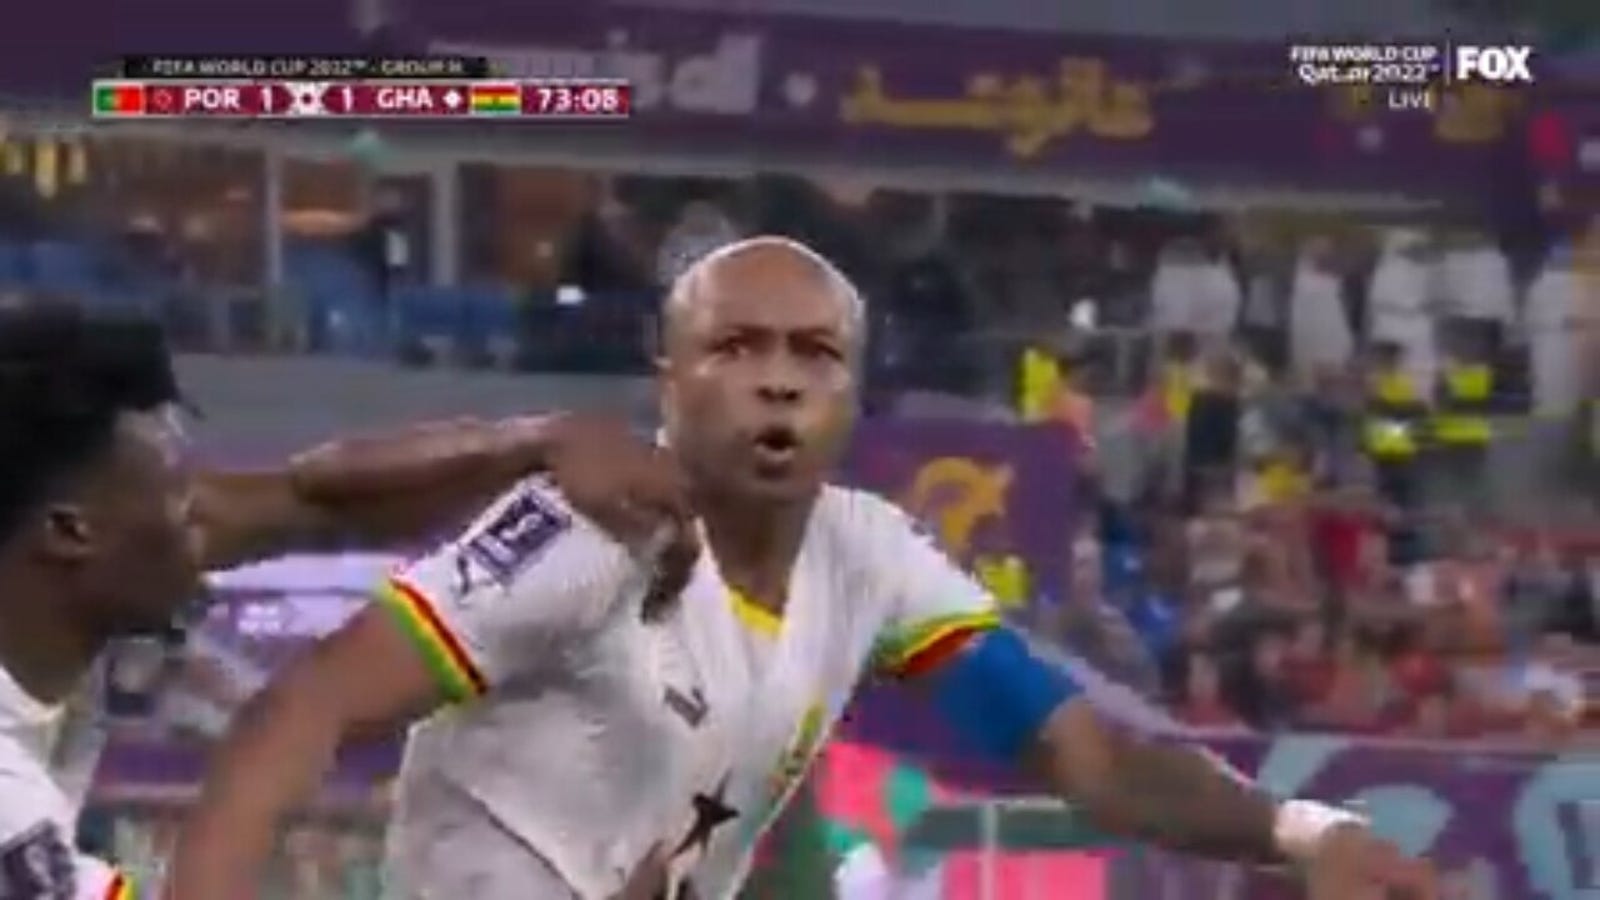 Ghana's André Ayew scores a goal against Portugal in the 73rd minute